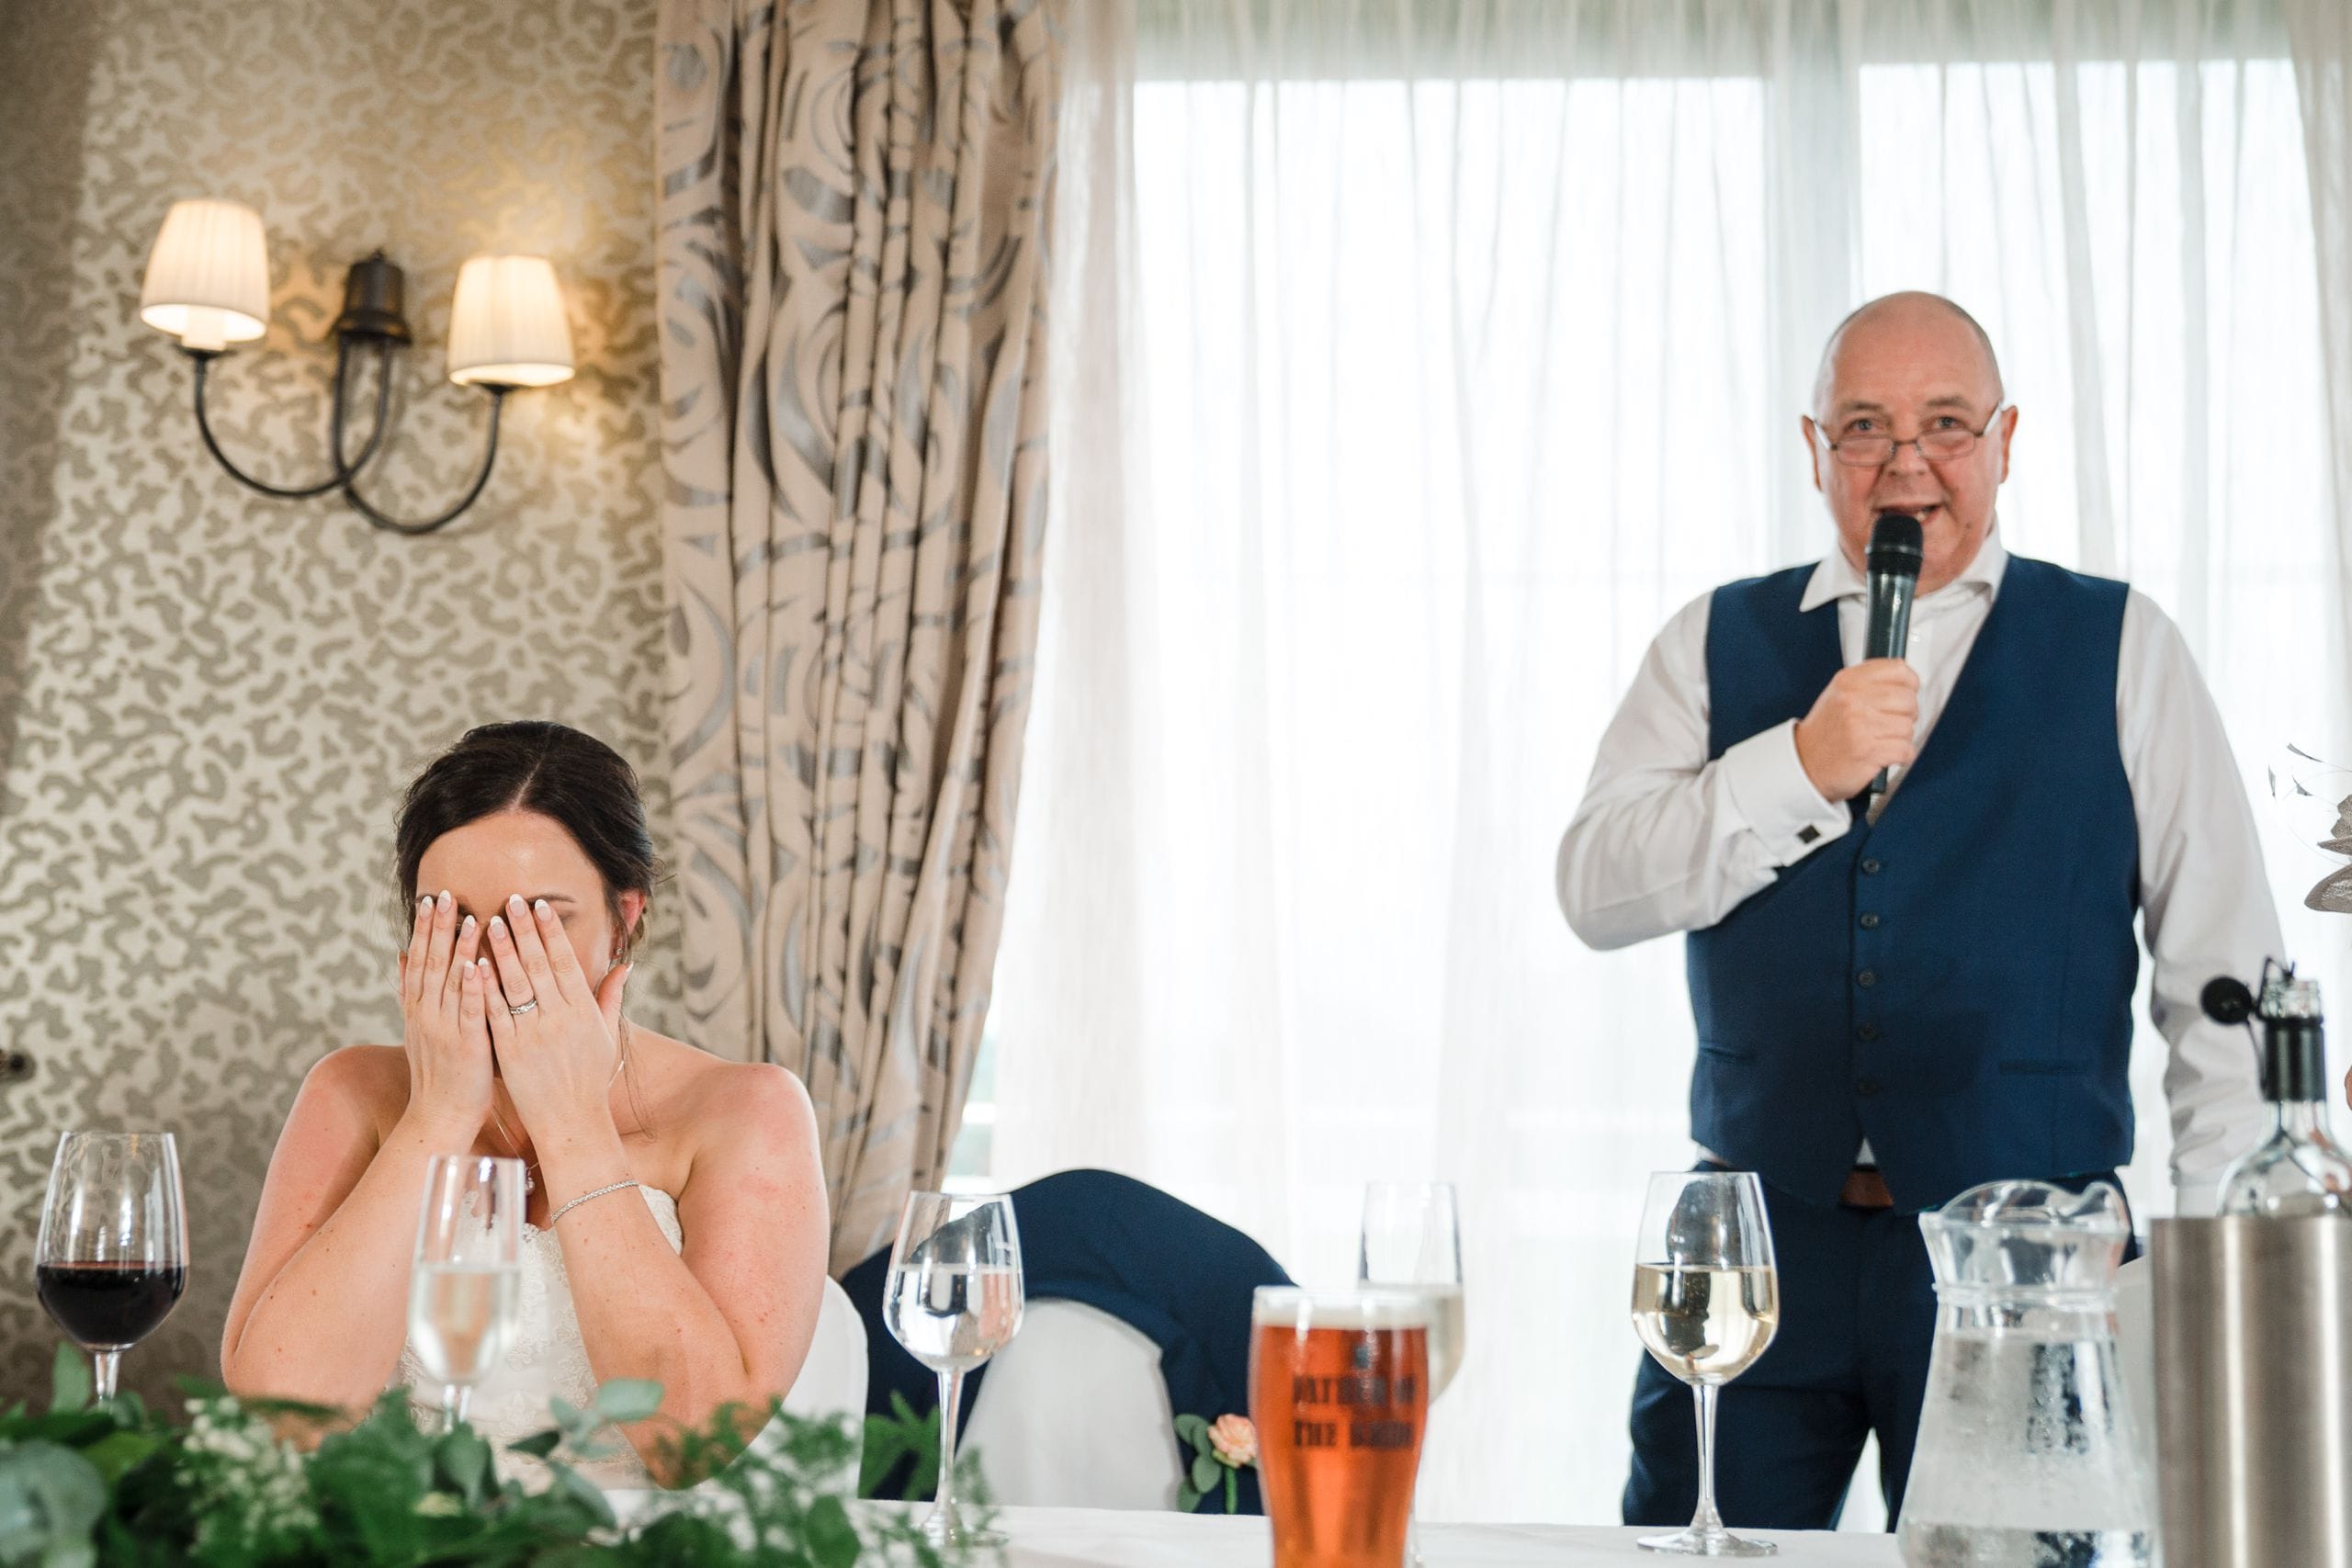 Bride covers face during Father of Bride speech